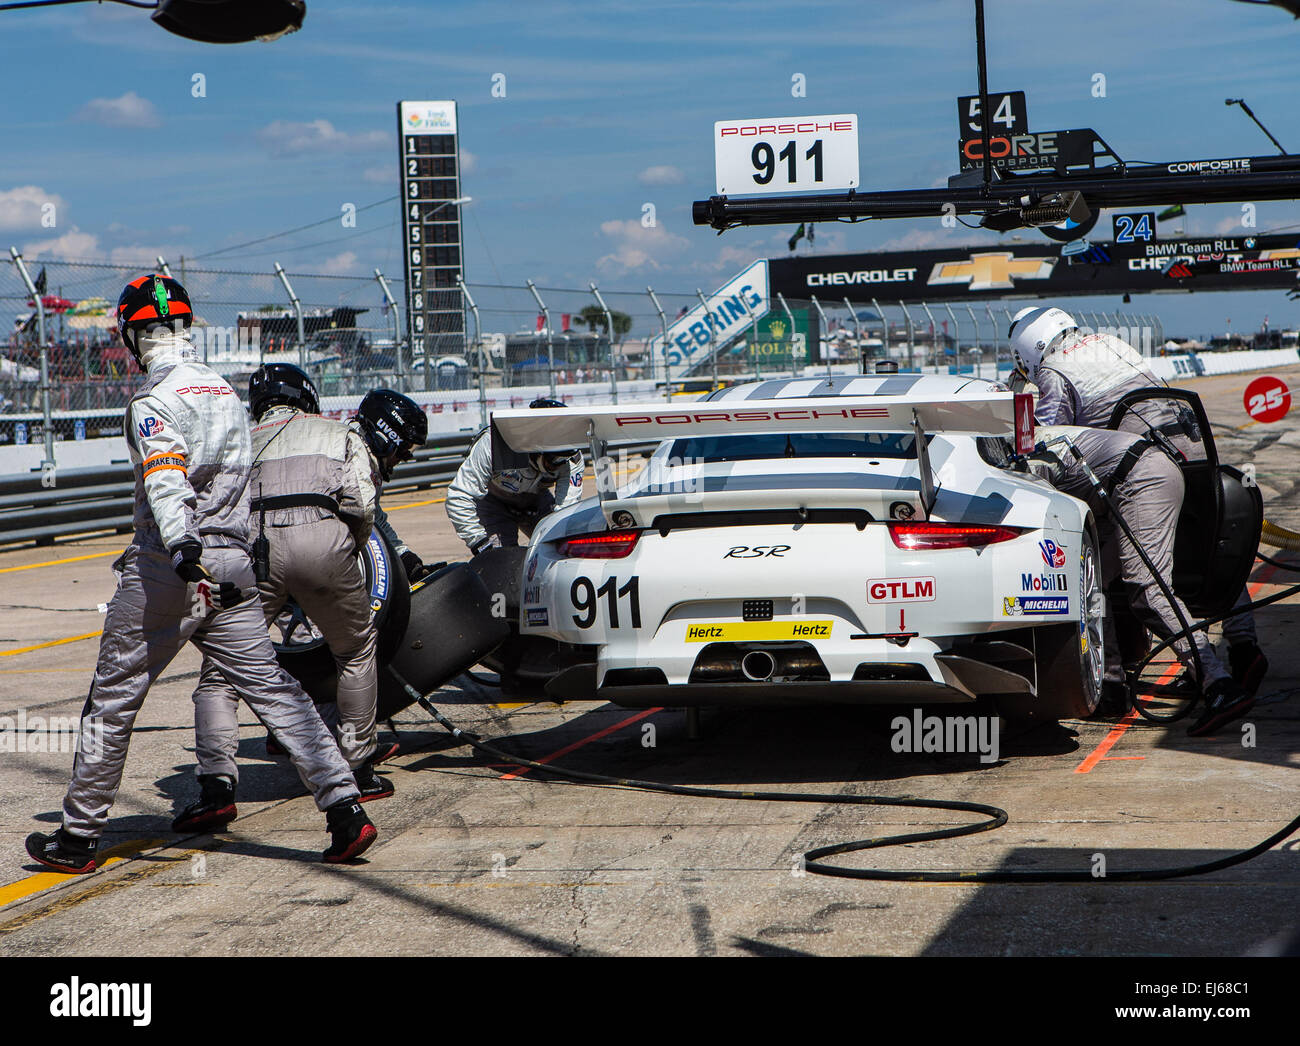 3/21/2015 - Sebring FL, USA - Pit crew in action for Porsche North America with drivers Nick Tandy-Bedford, United Kingdom/Patrick Pilet-Auch, France/Richard Lietz-Ybbs, Austria in a Porsche 911 RSR car with a Porsche engine and Michelin Tires sponsored by Porsche North America at the Sebring International Raceway in Sebring FL. DelMecum/Cal Sport Media Stock Photo